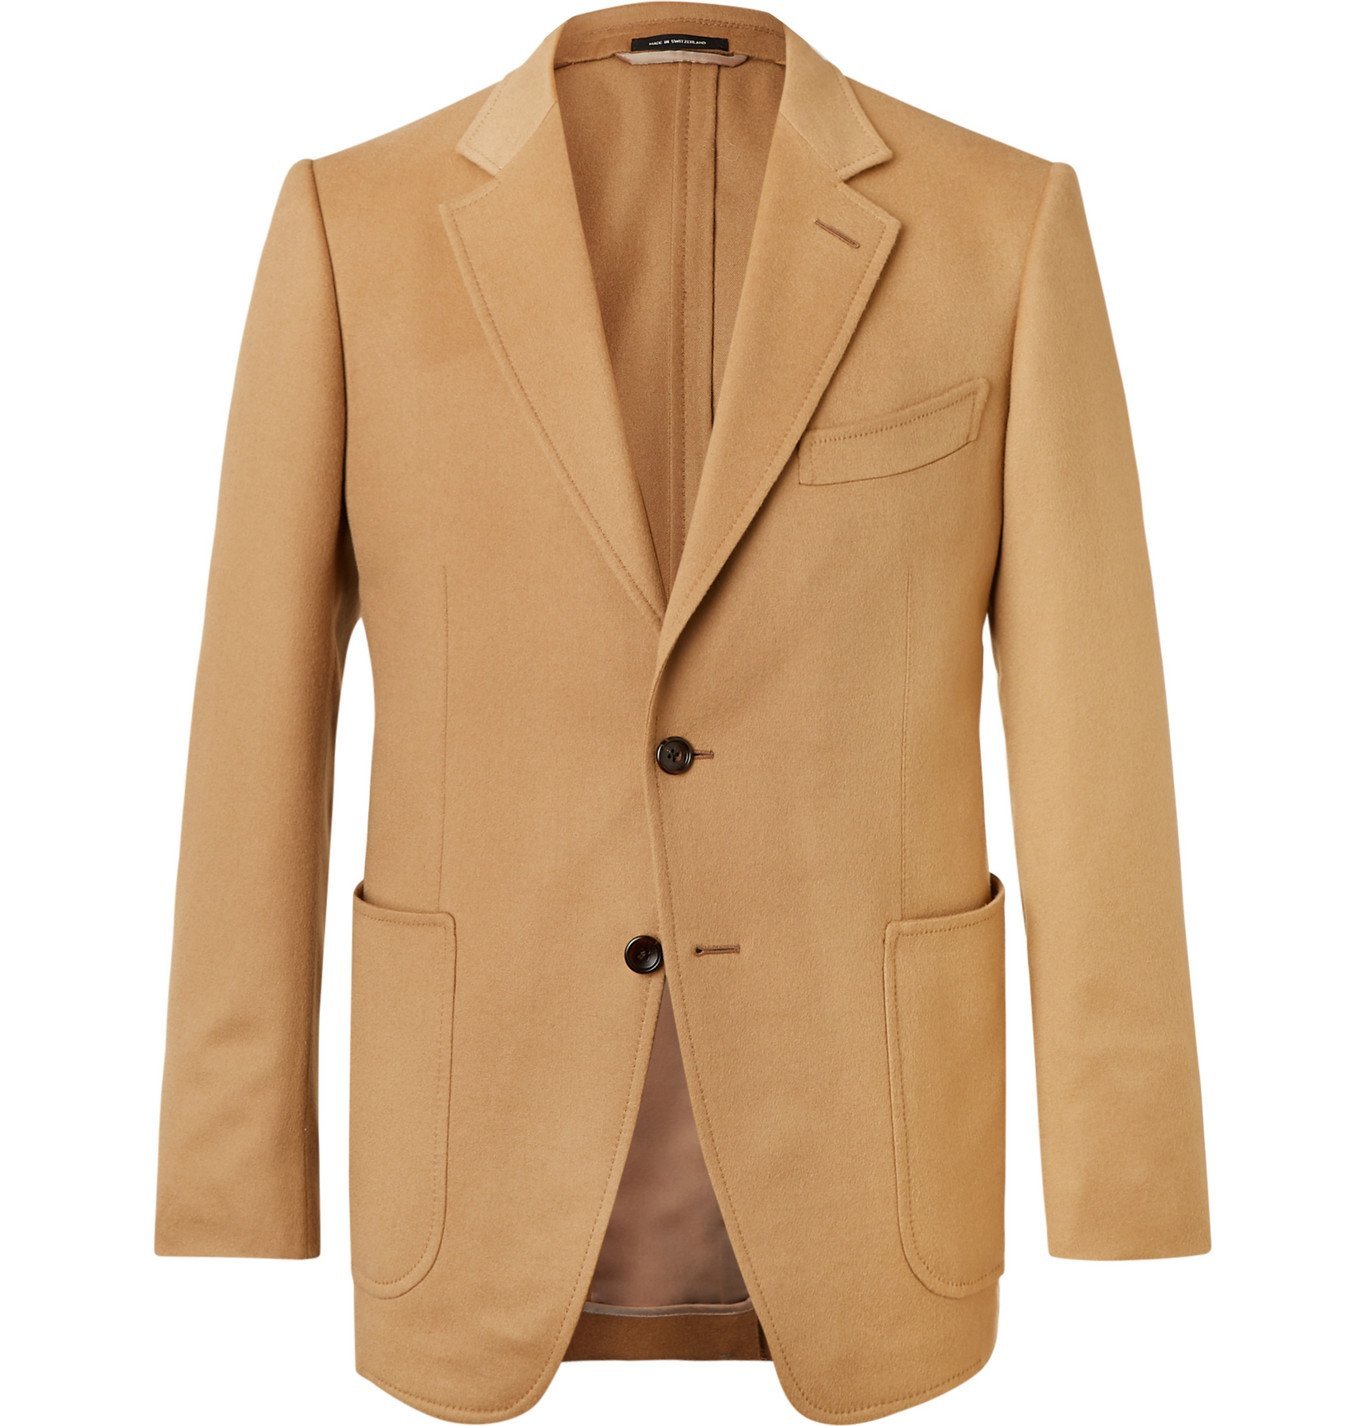 TOM FORD - O'Connor Slim-Fit Unstructured Cashmere Blazer - Brown TOM FORD